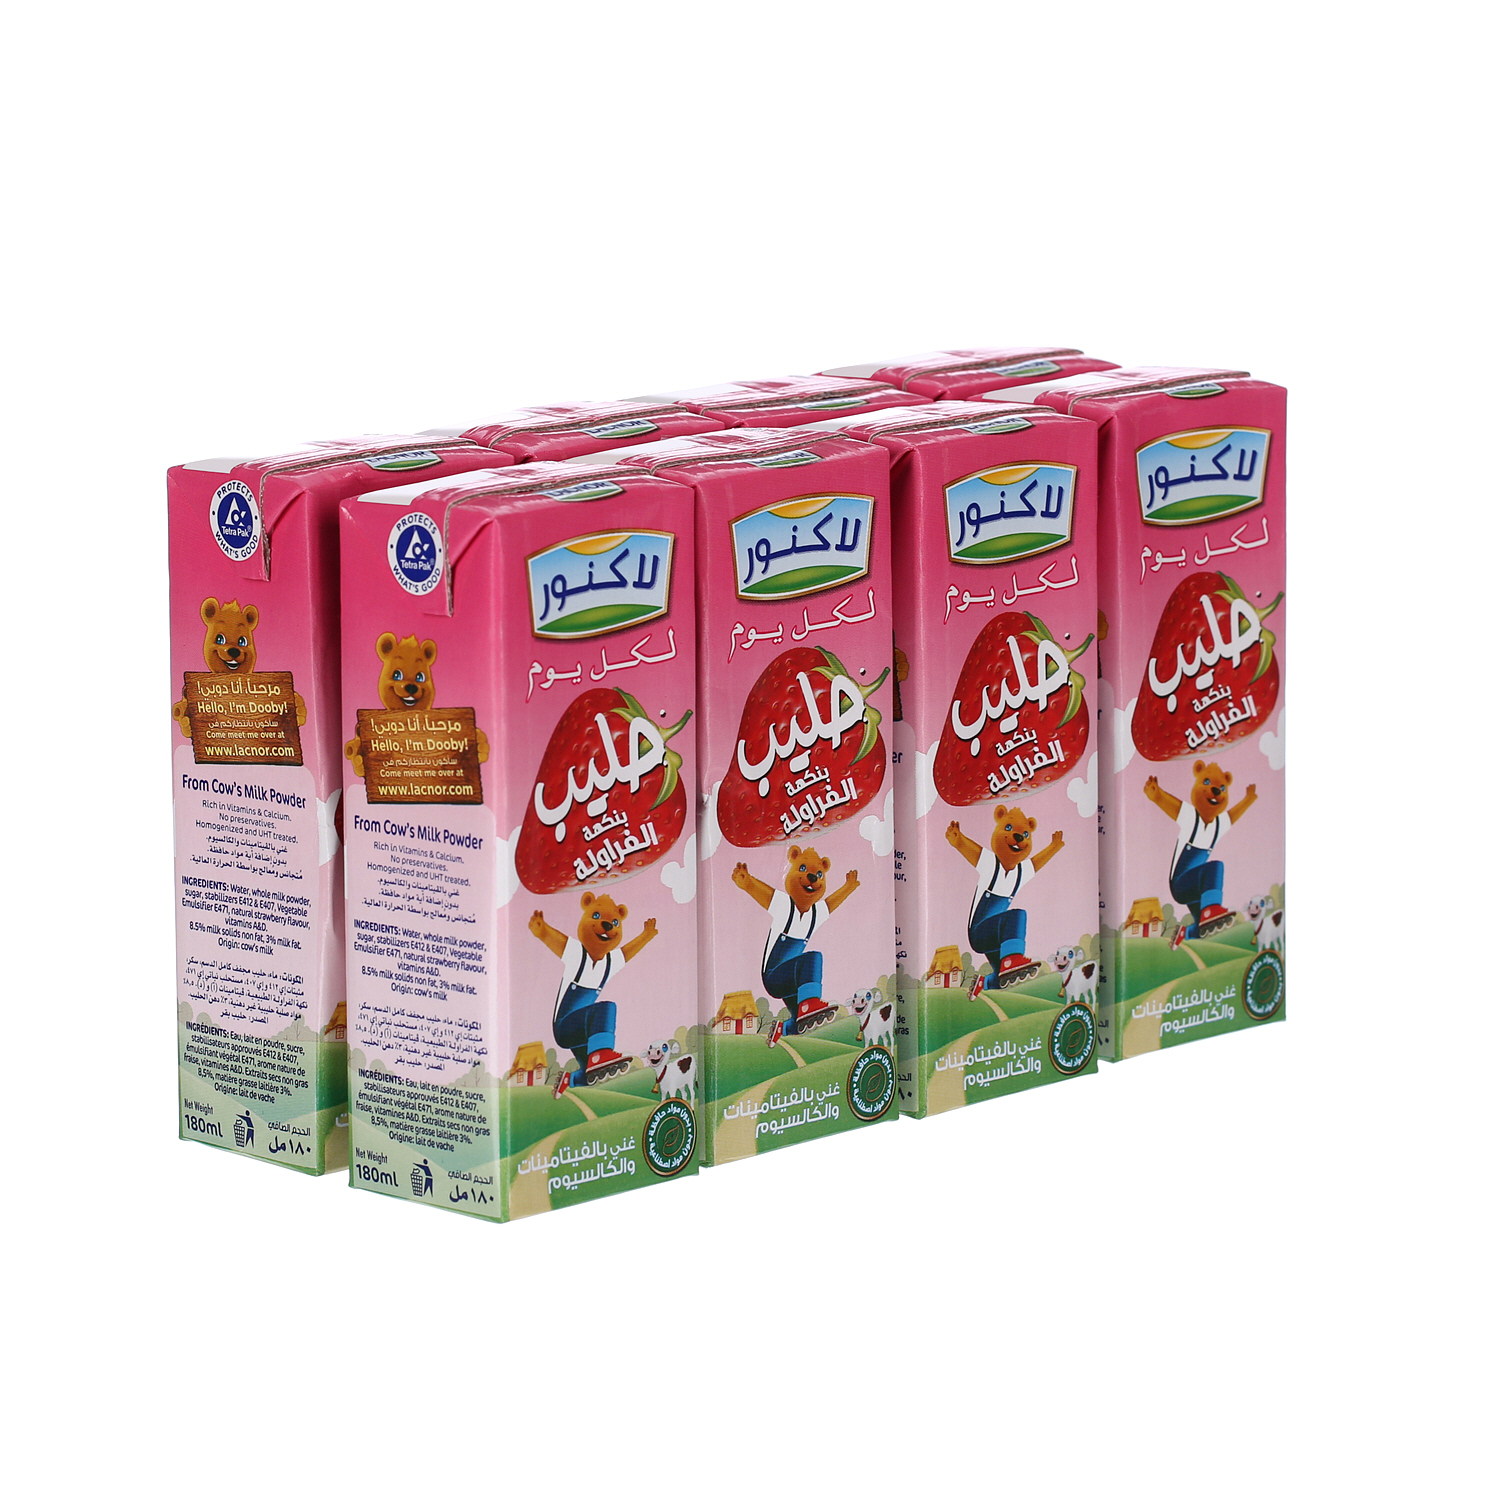 Lacnor Essentials Strawberry Flavored Milk 180 ml Pack of 8